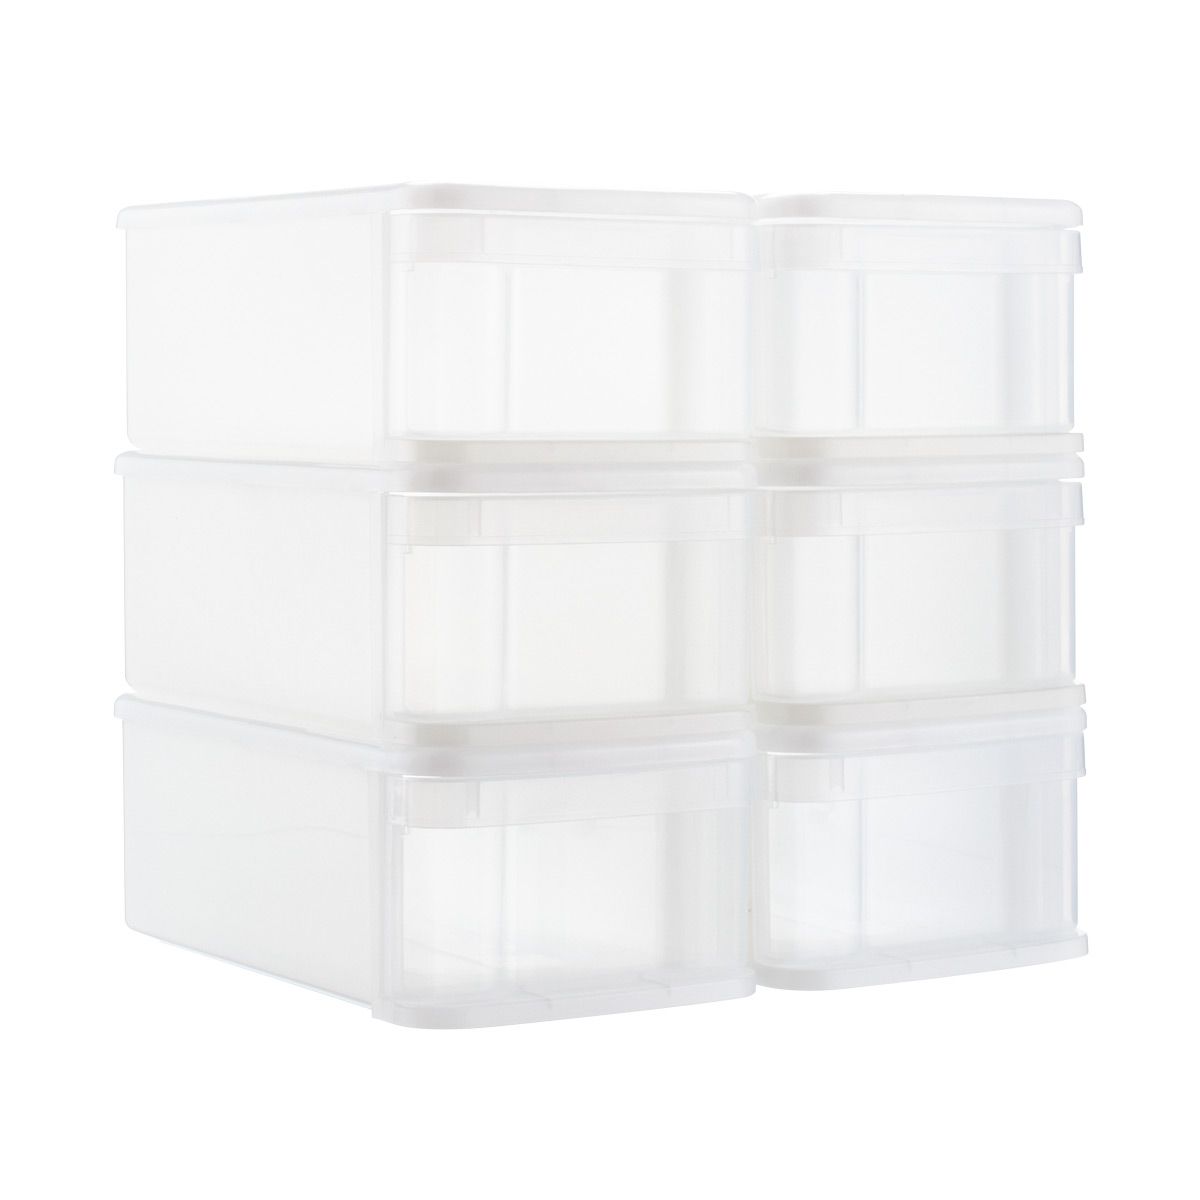 Tint Stacking Drawers | The Container Store